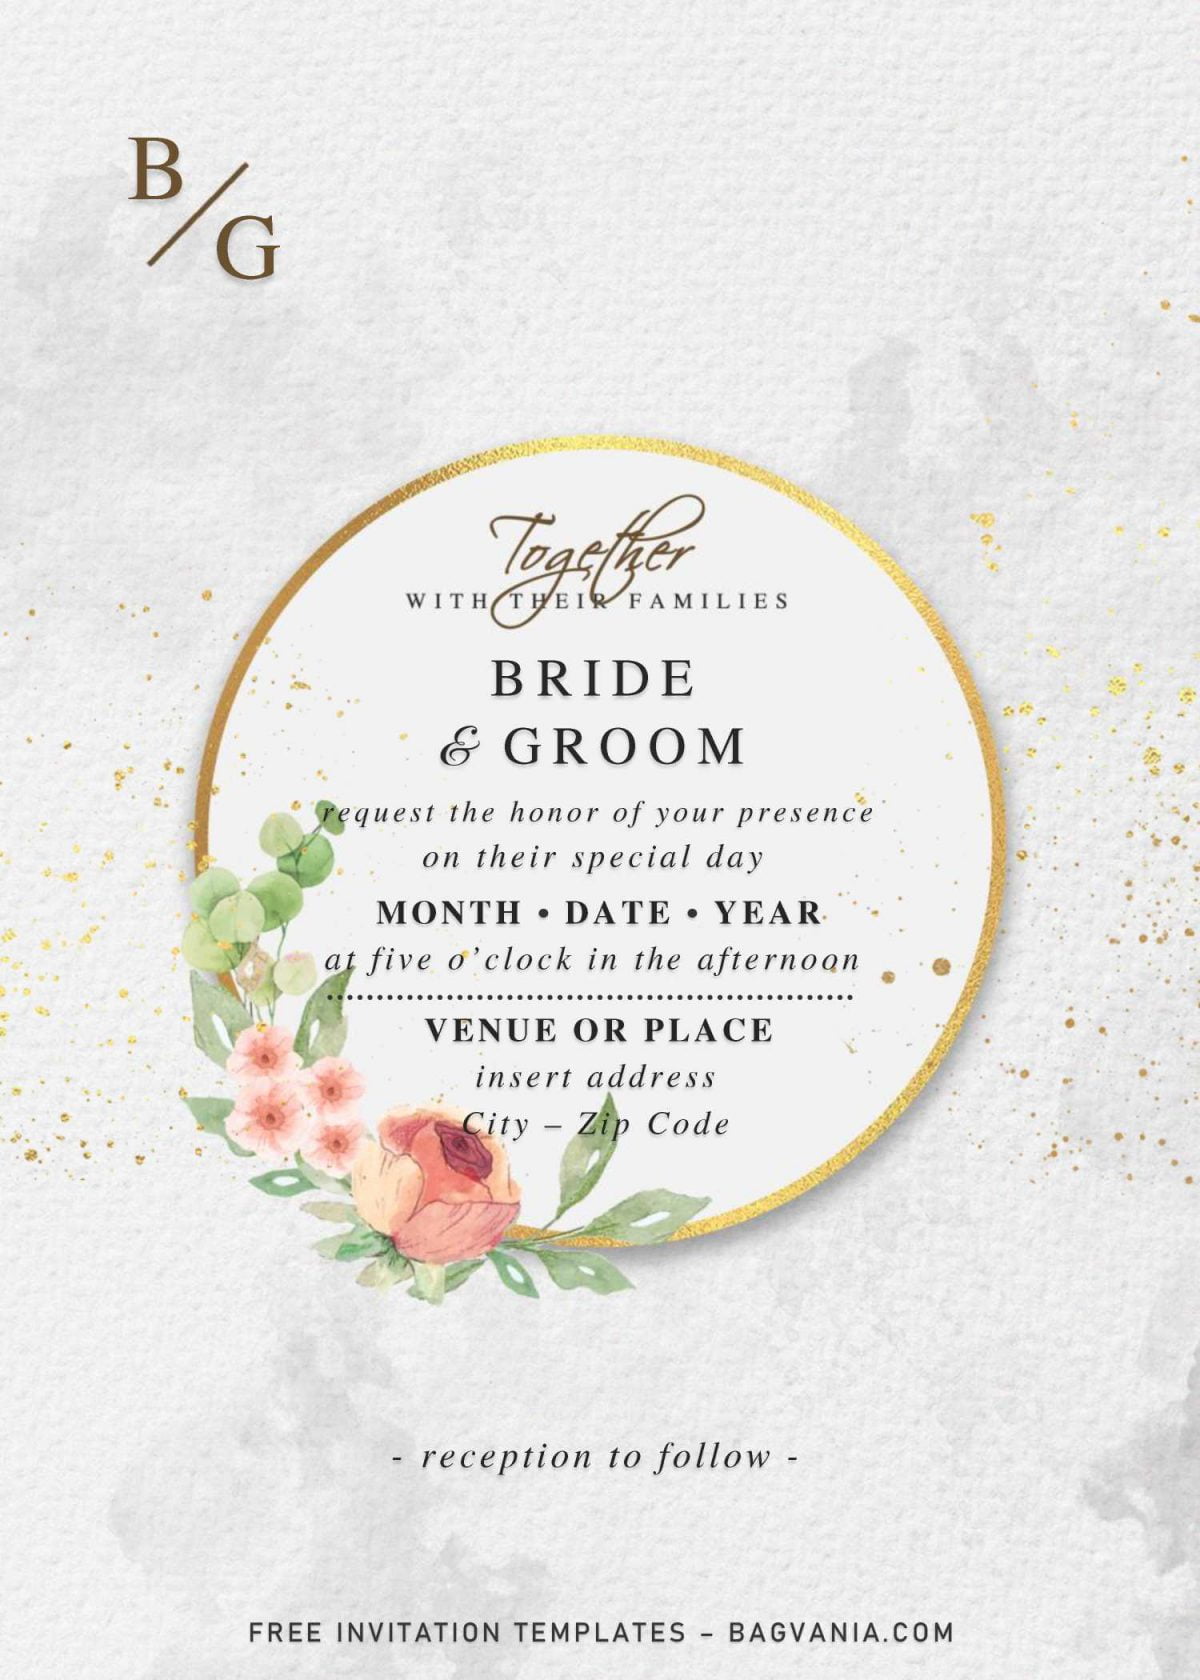 Free Vintage Floral Wedding Invitation Templates For Word and has ellipse shaped text box with gold frame